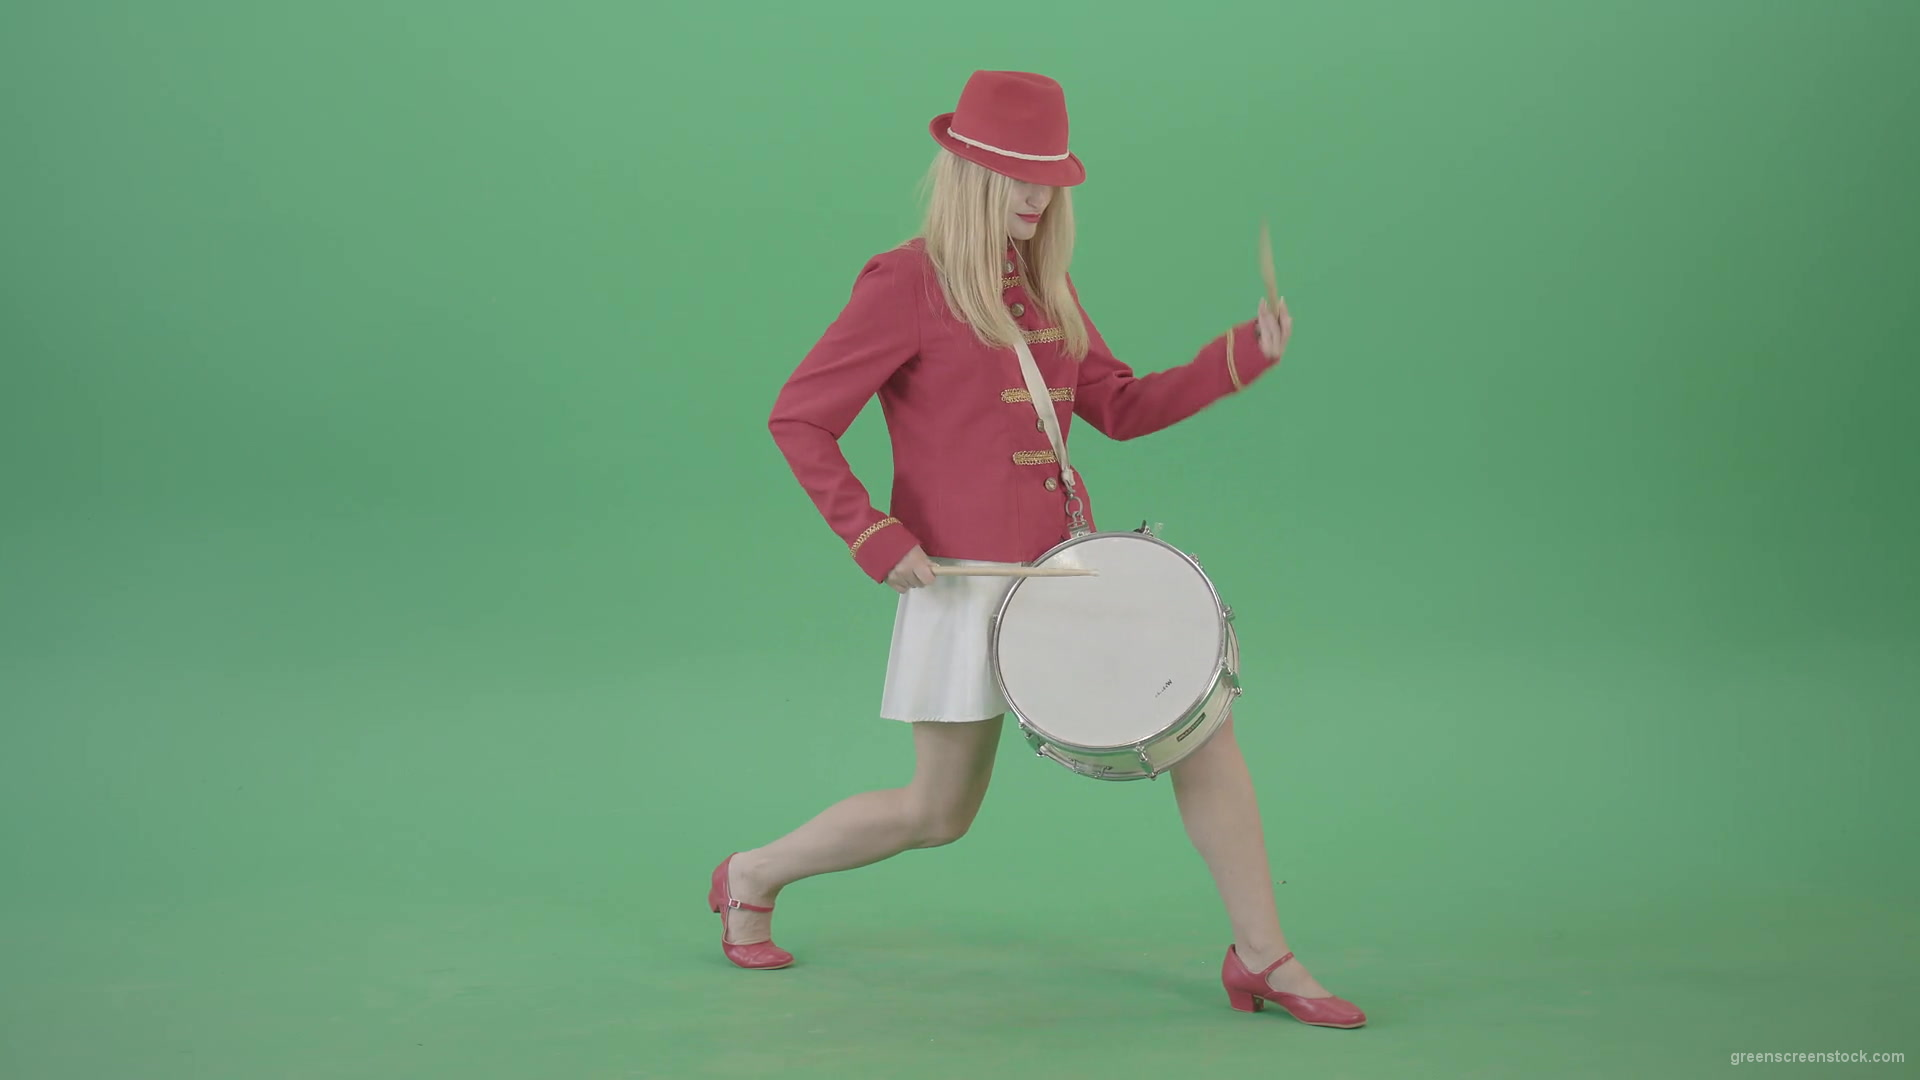 Blonde-Girl-in-Red-Uniform-making-beats-on-music-drum-instrument-in-active-pose-on-green-screen-4K-Video-Footage-1920_006 Green Screen Stock